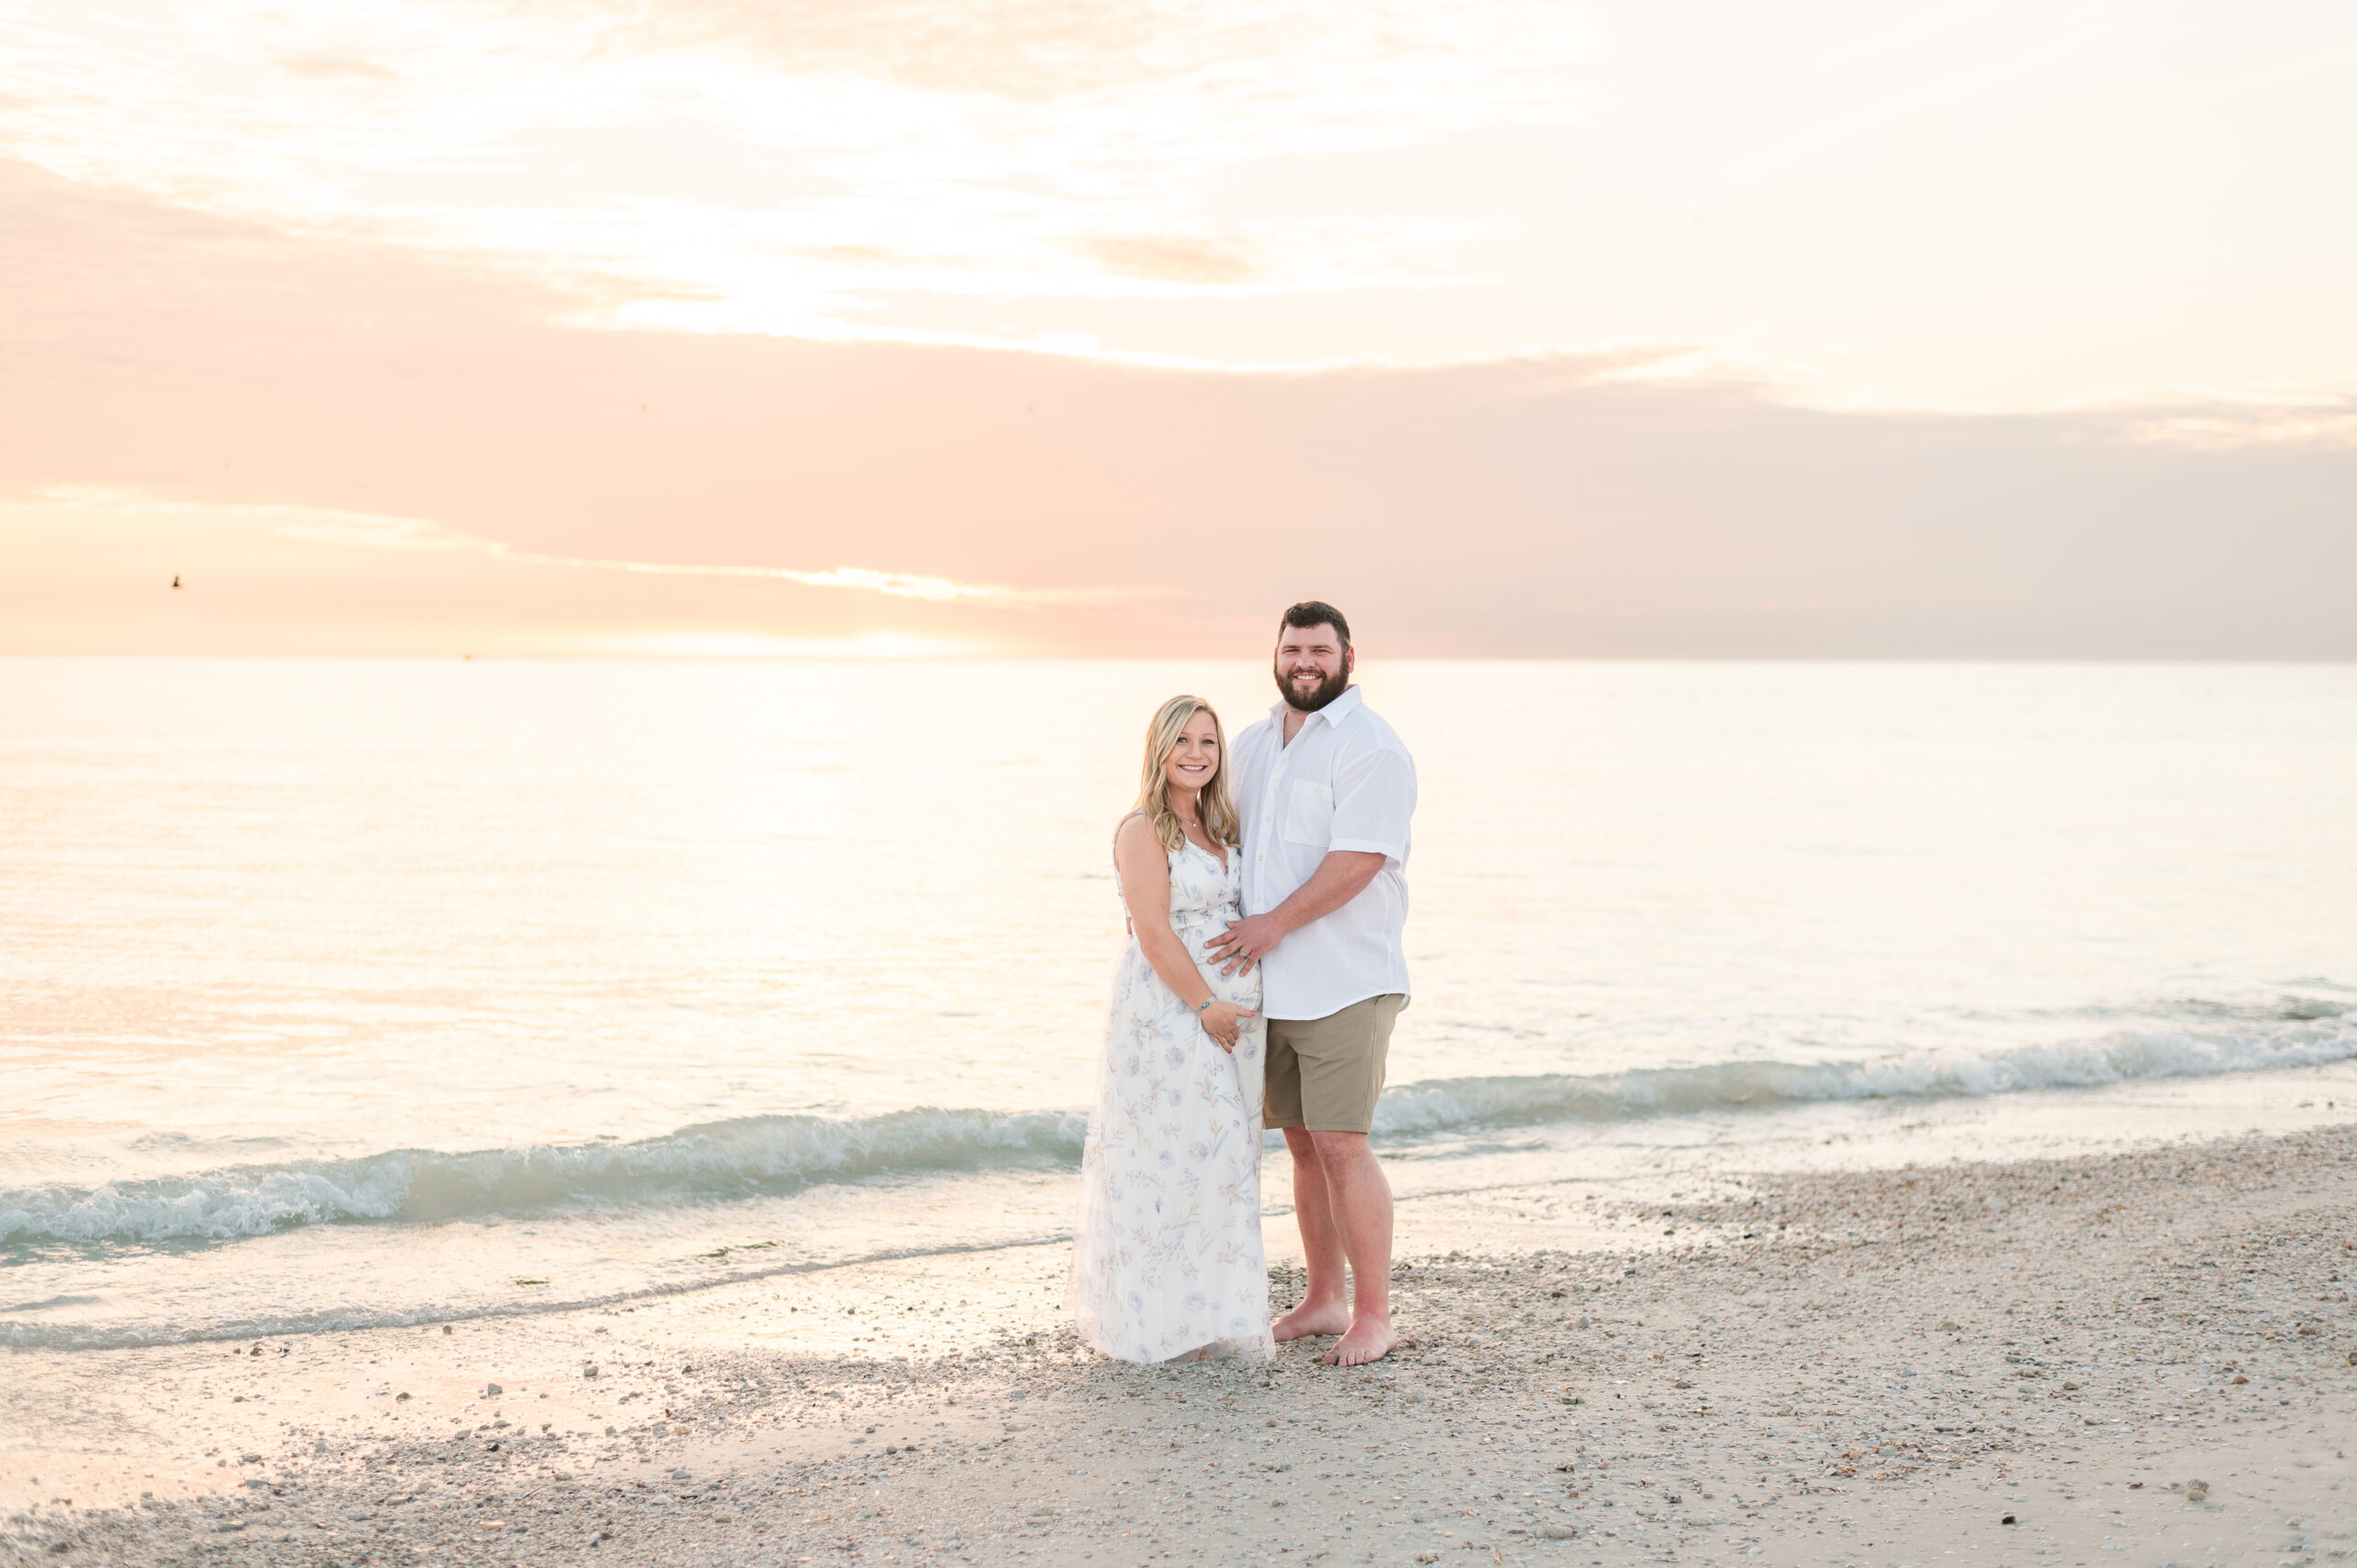 Couple standing at the waters edge at the beach with with beautiful sunset behind them. The woman is pregnant, and holding her belly and the husband is holding her belly too. She is wearing a long white dress and he is wearing a white shirt and khaki shorts.